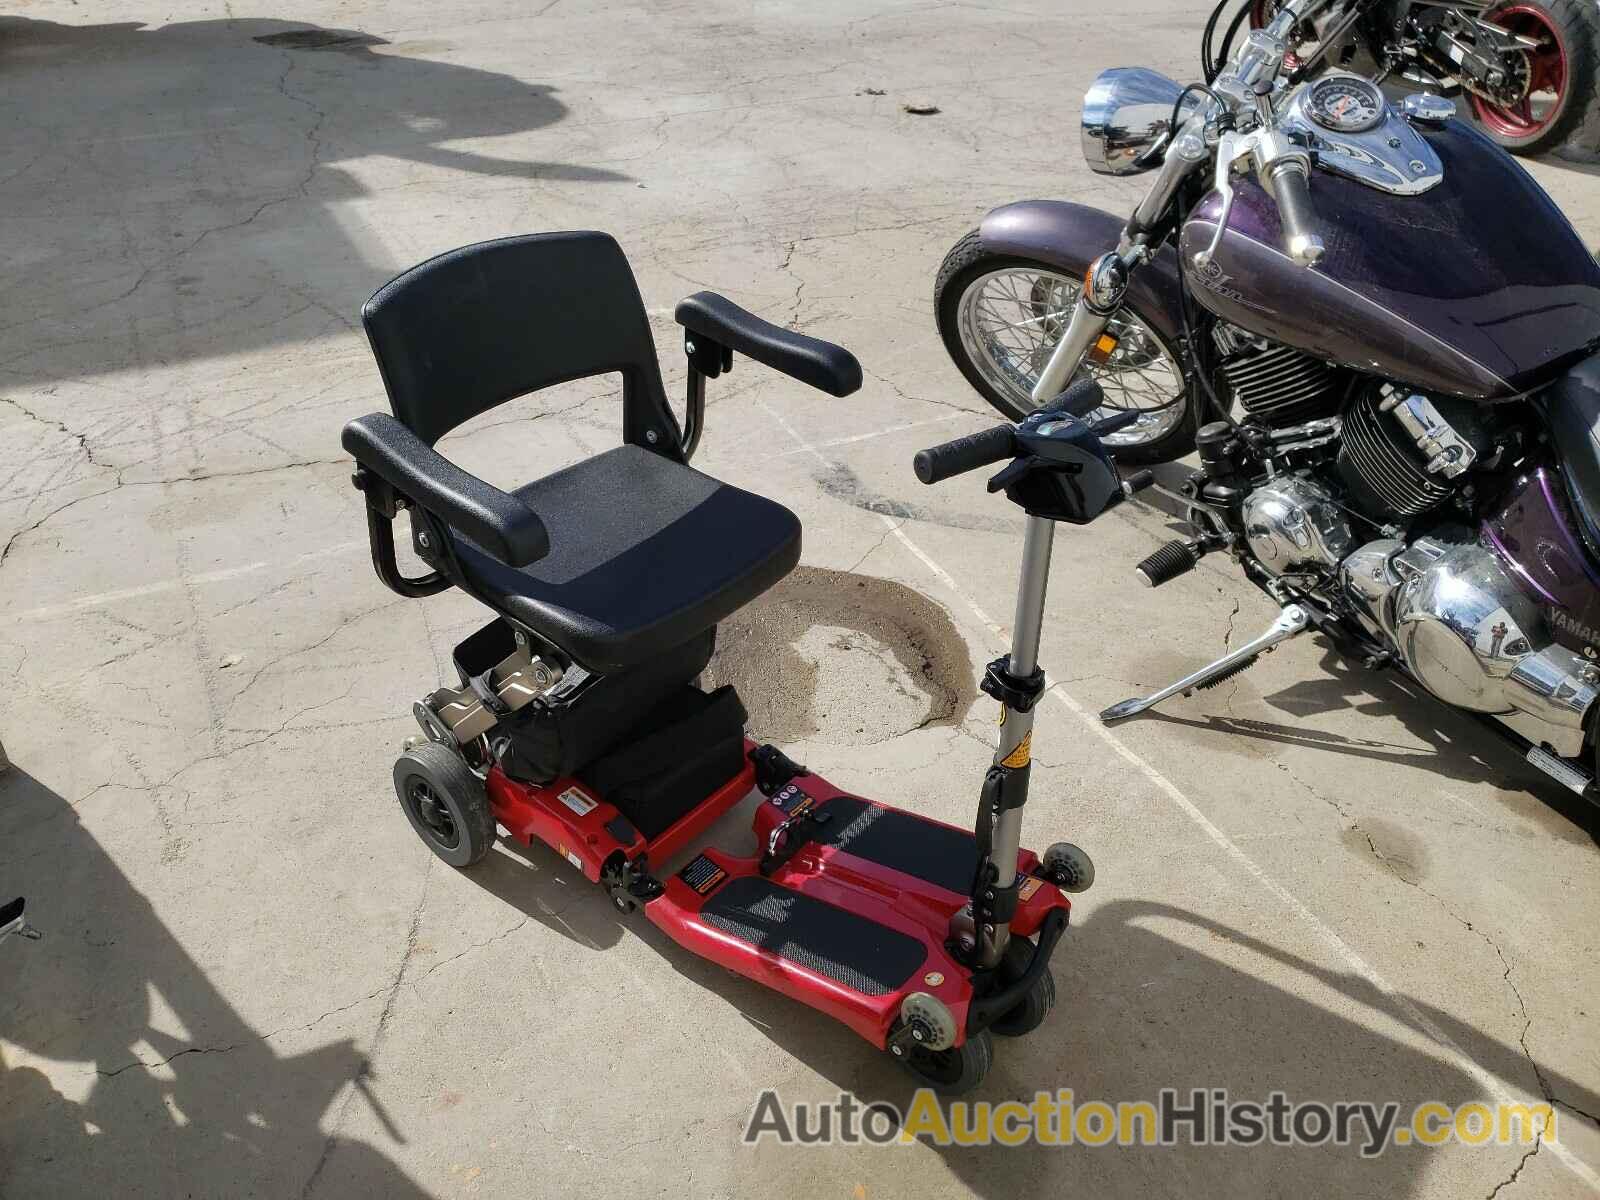 2000 OTHER SCOOTER, 0THERSC00TER